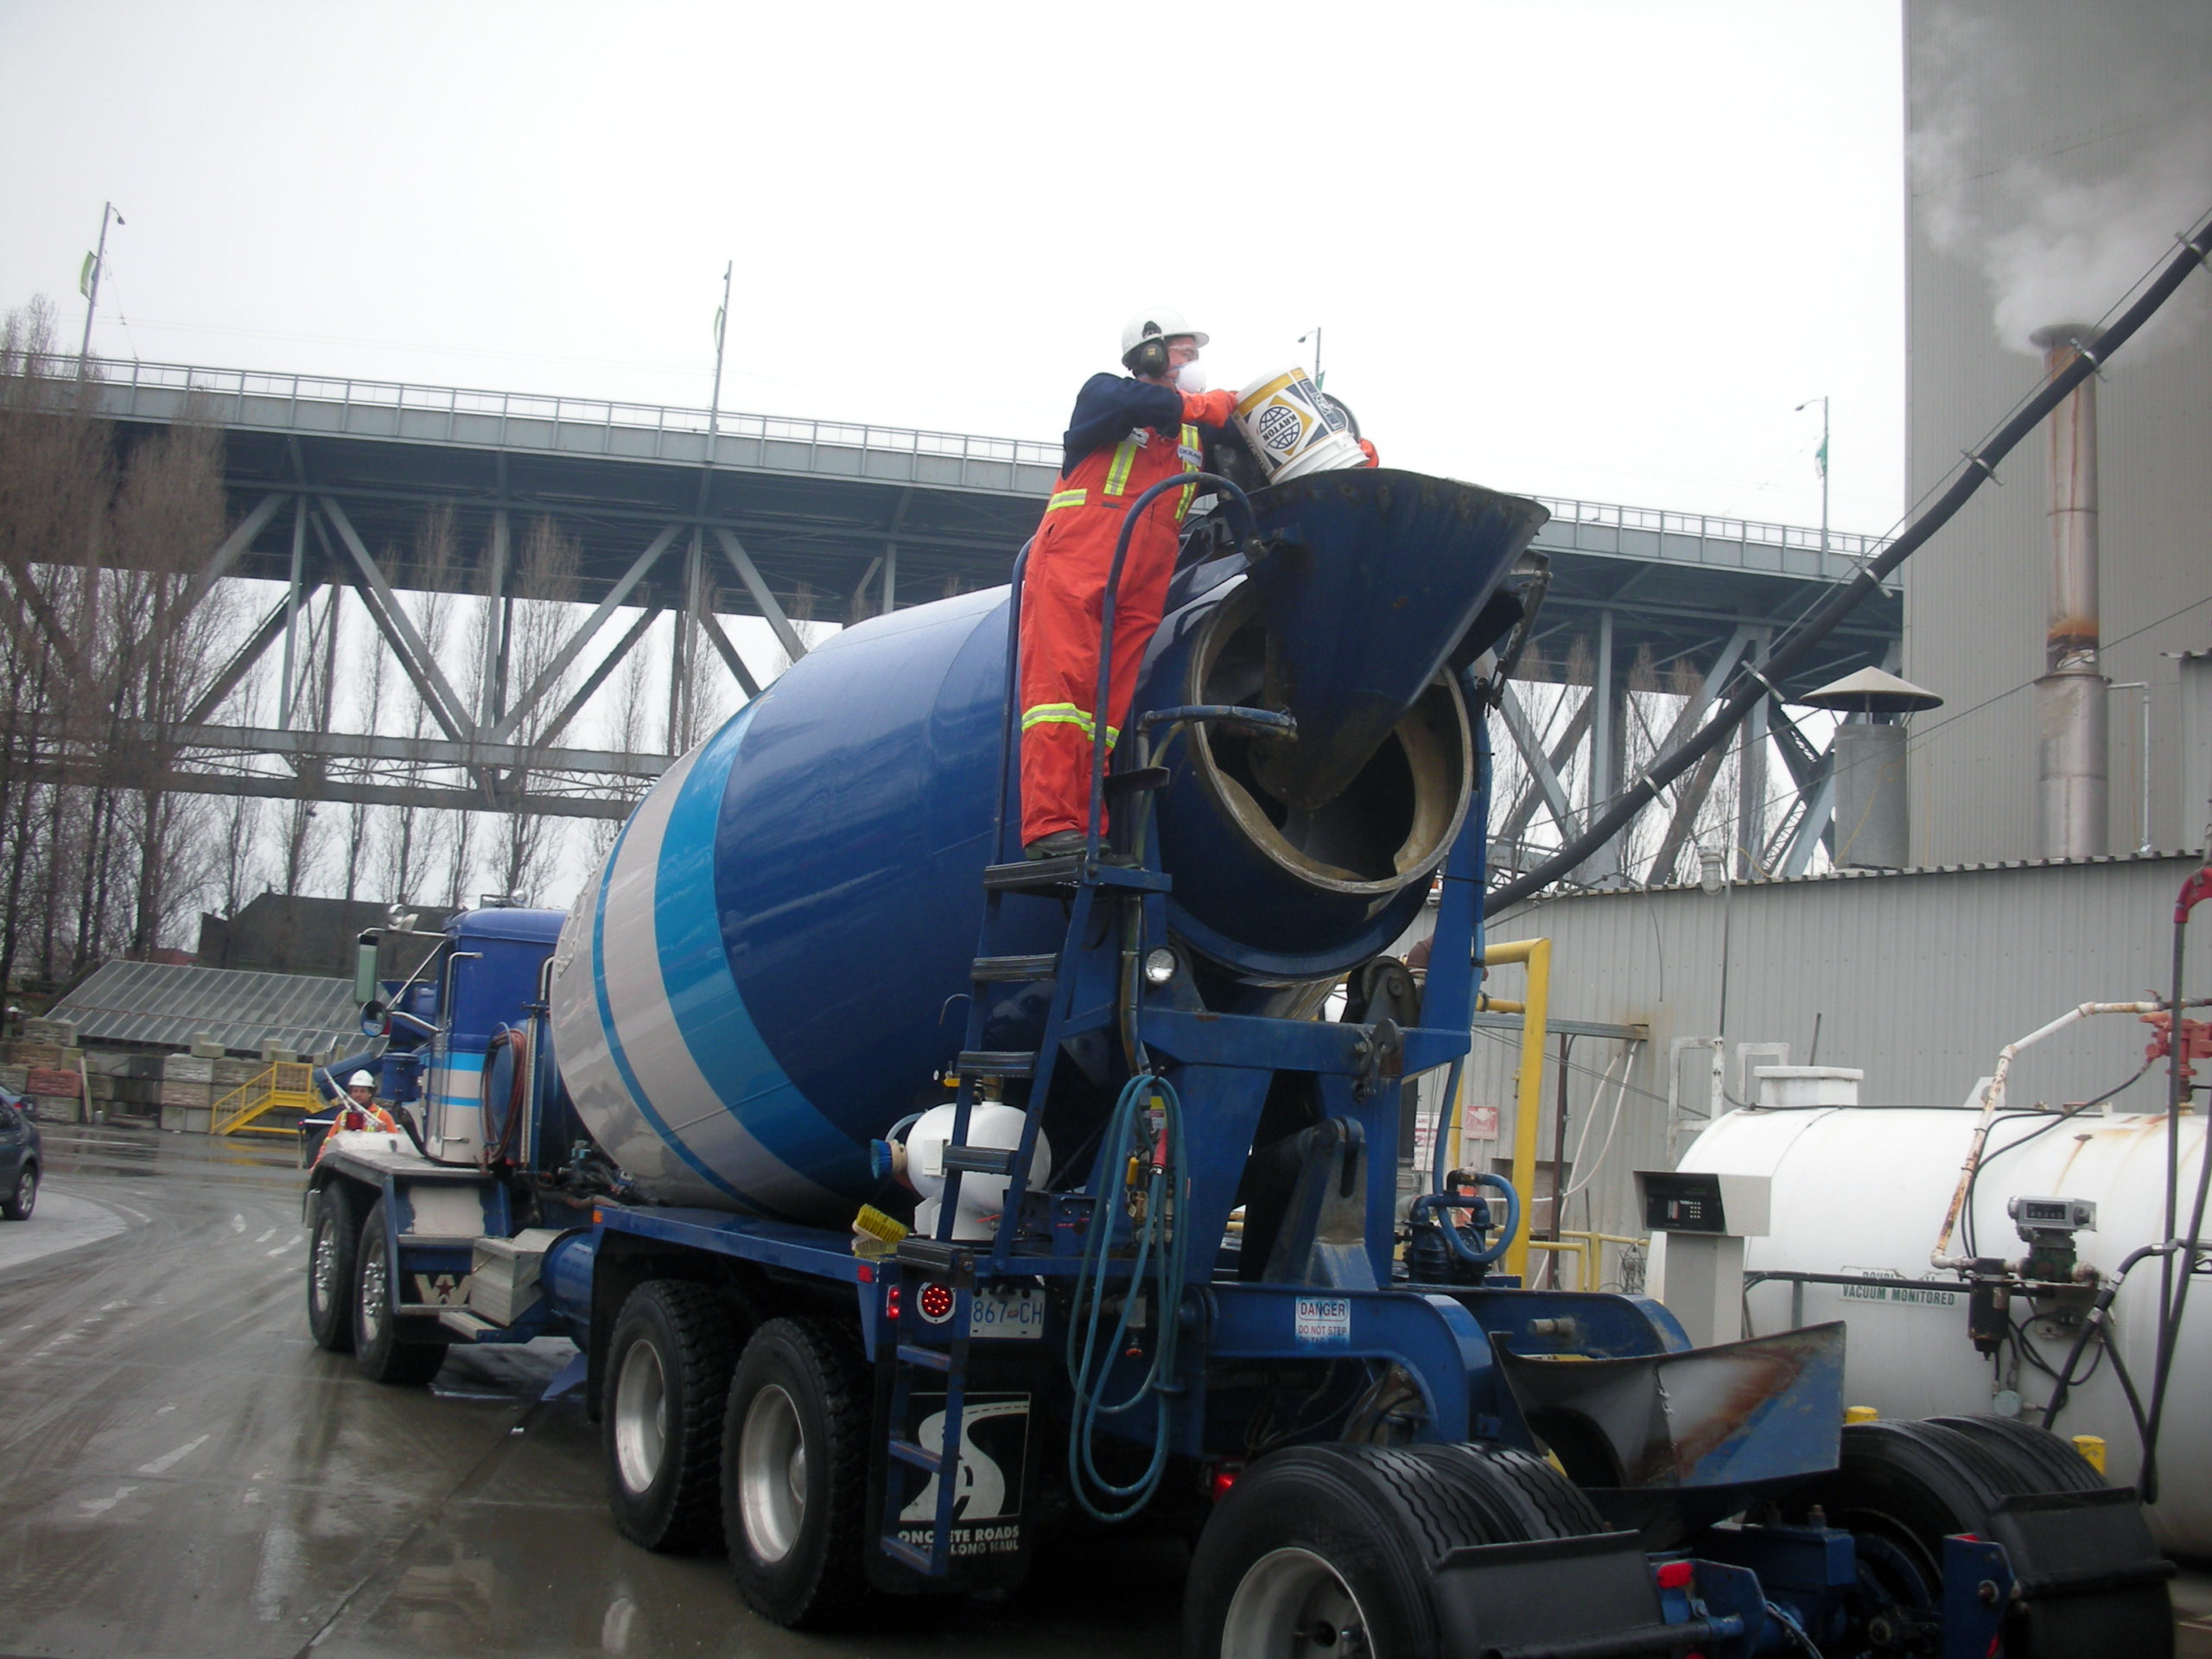 A construction worker is adding KIM admixture into a concrete mix during batching.